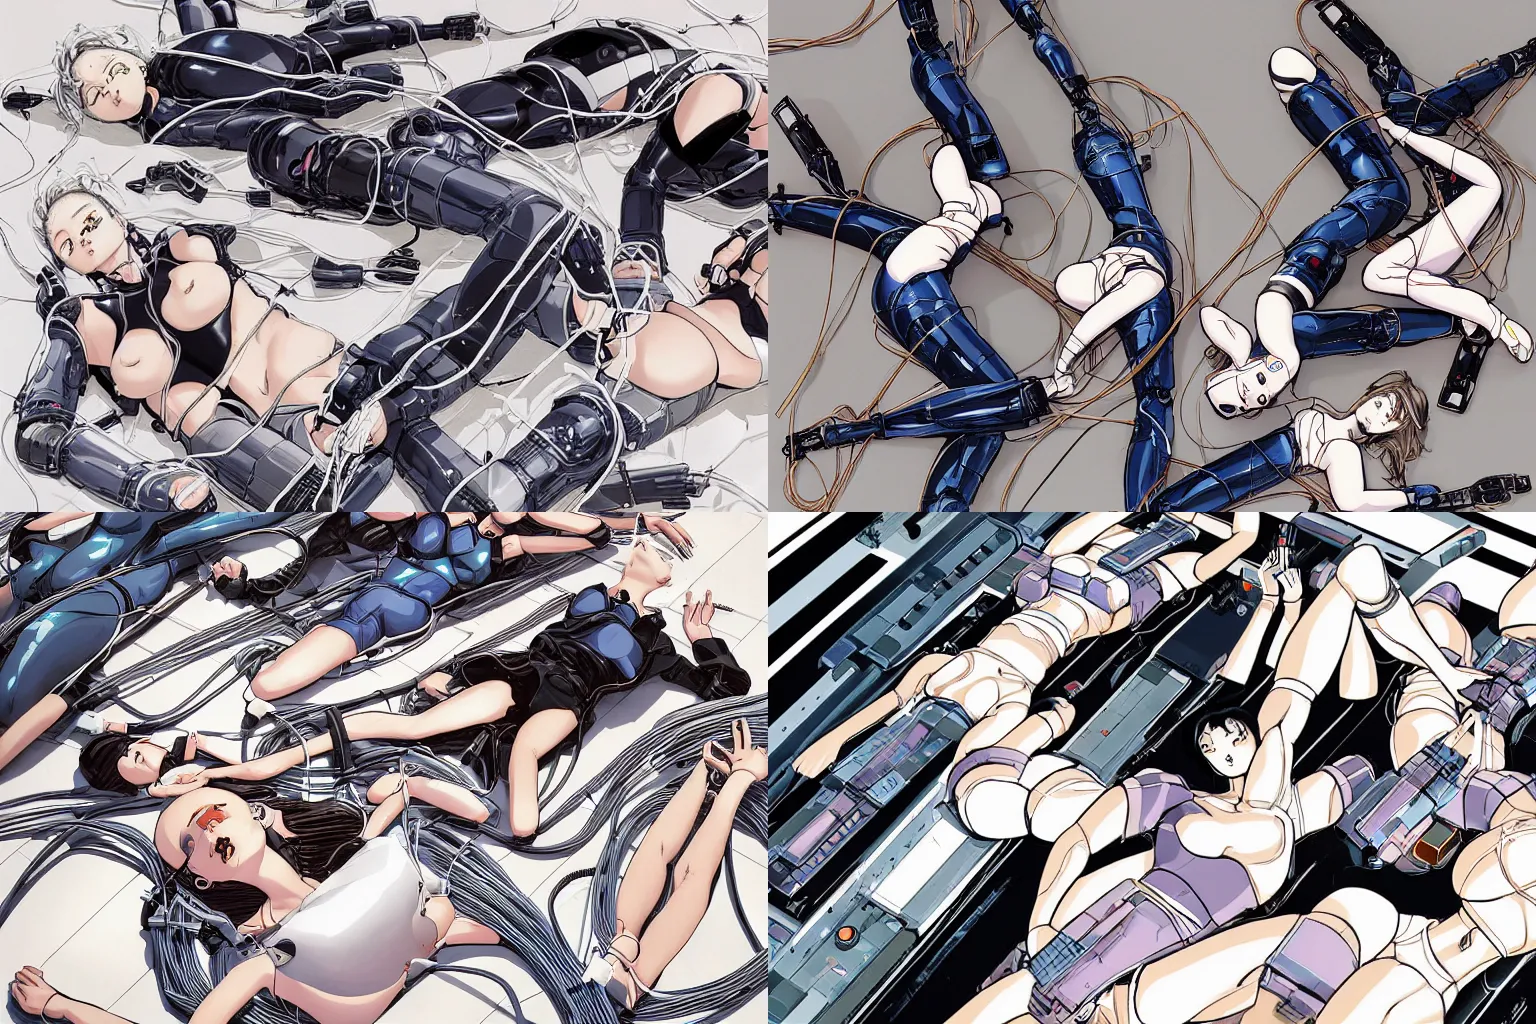 Prompt: an illustration of a group of three female androids in style of masamune shirow, lying on an empty, white floor with their bodies broken scattered rotated in different poses and cables and wires coming out, by yukito kishiro and katsuhiro otomo